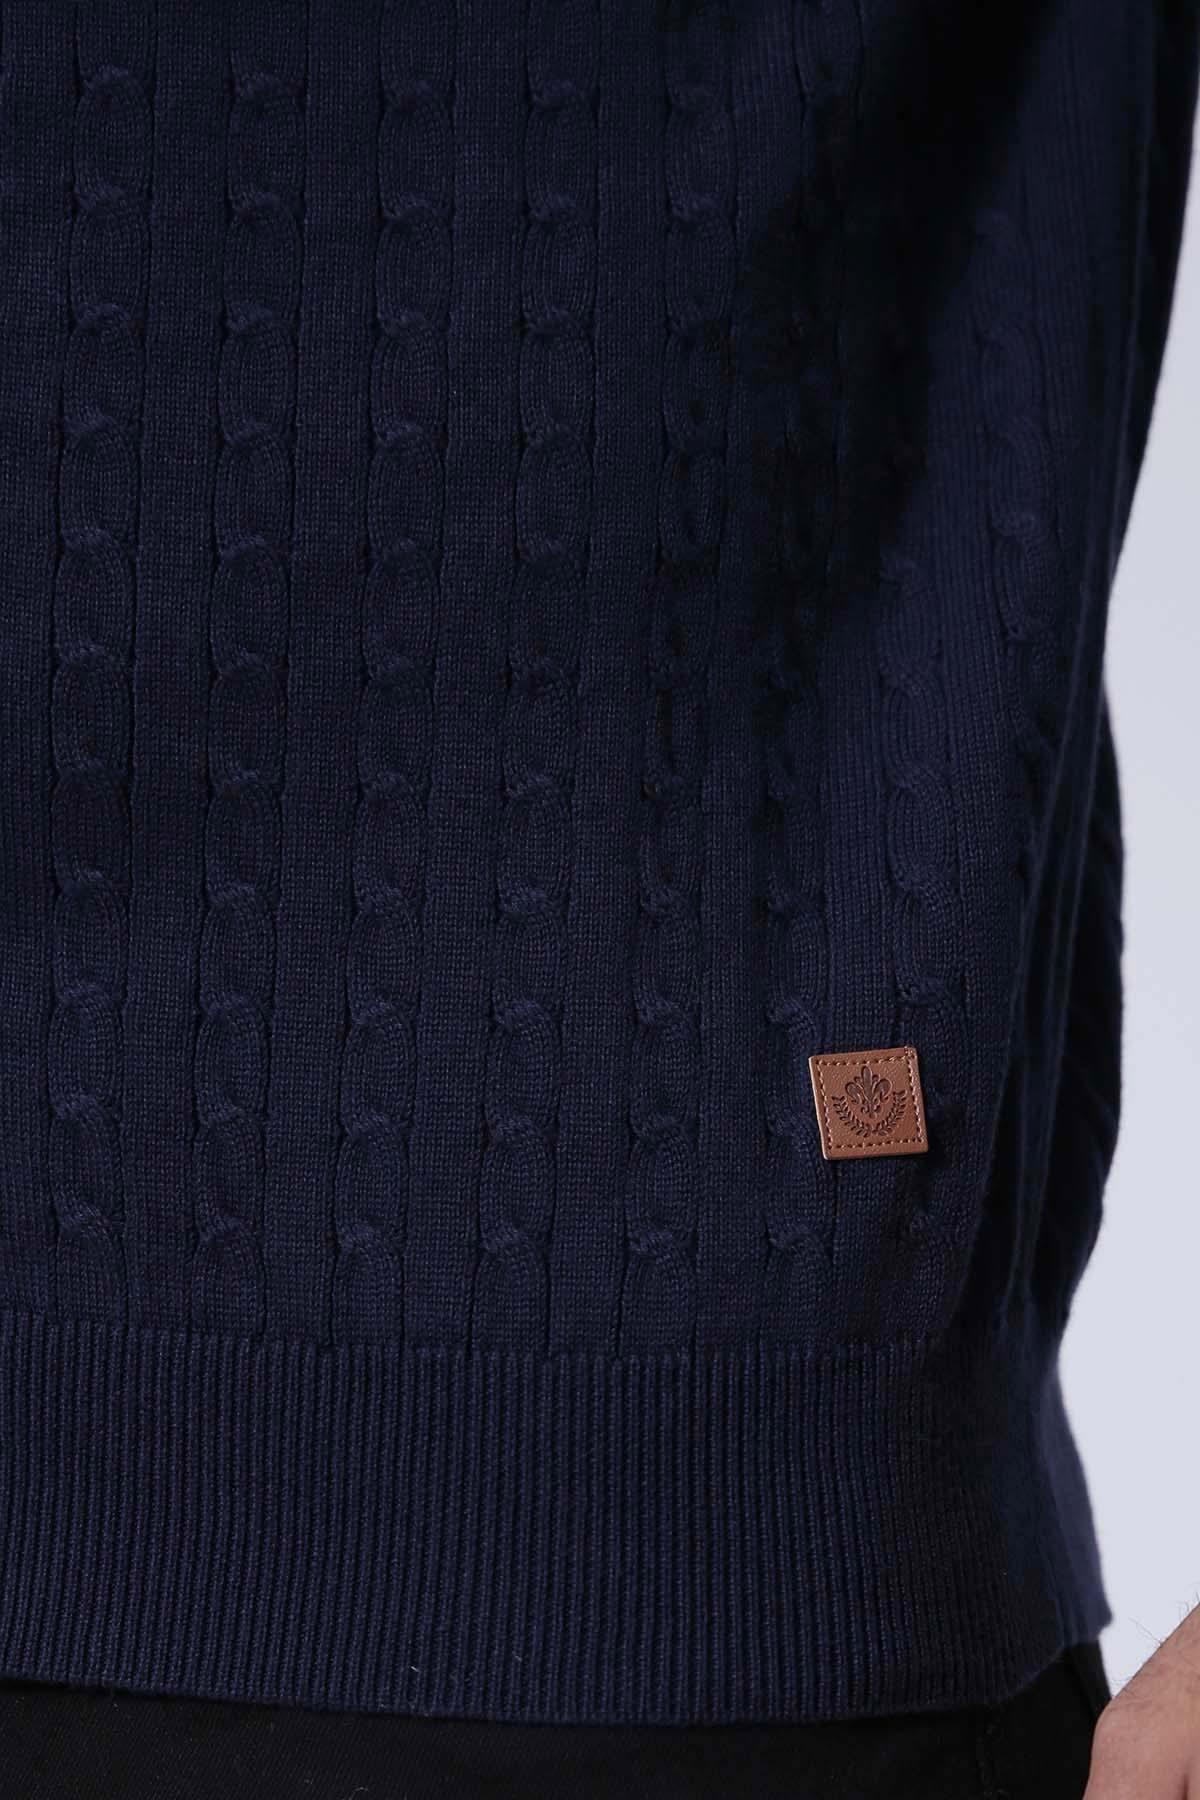 SWEATER ZIPPER FULL SLEEVE NAVY at Charcoal Clothing